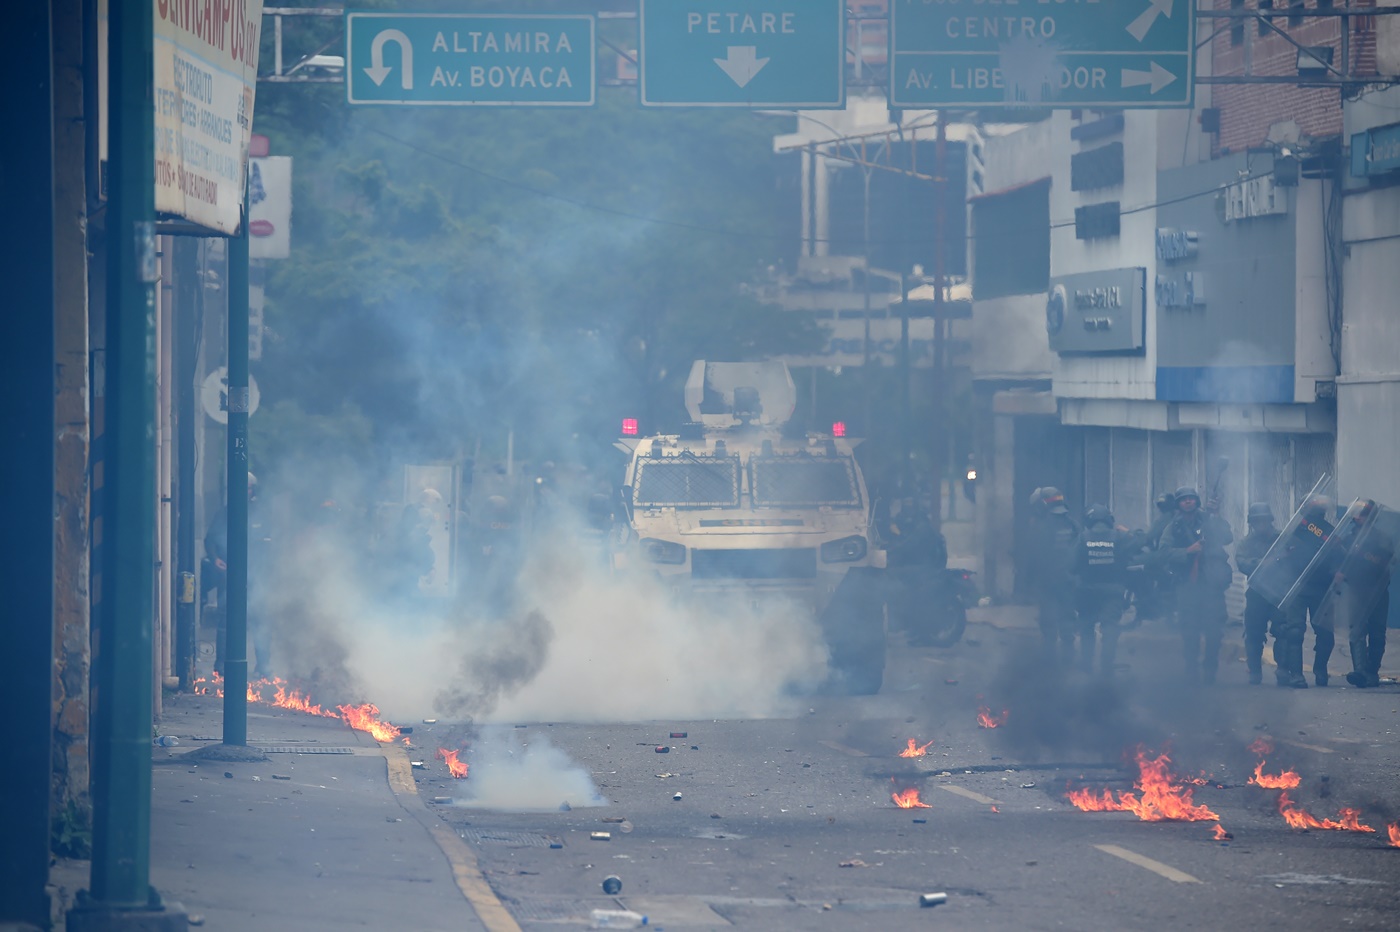 Venezuelan National Guard personnel in riot gear and supported by a riot control vehicle clash with opposition demonstrators during a protest against Venezuelan President Nicolas Maduro, in Caracas on May 3, 2017. Venezuela's angry opposition rallied Wednesday vowing huge street protests against President Nicolas Maduro's plan to rewrite the constitution and accusing him of dodging elections to cling to power despite deadly unrest. / AFP PHOTO / RONALDO SCHEMIDT